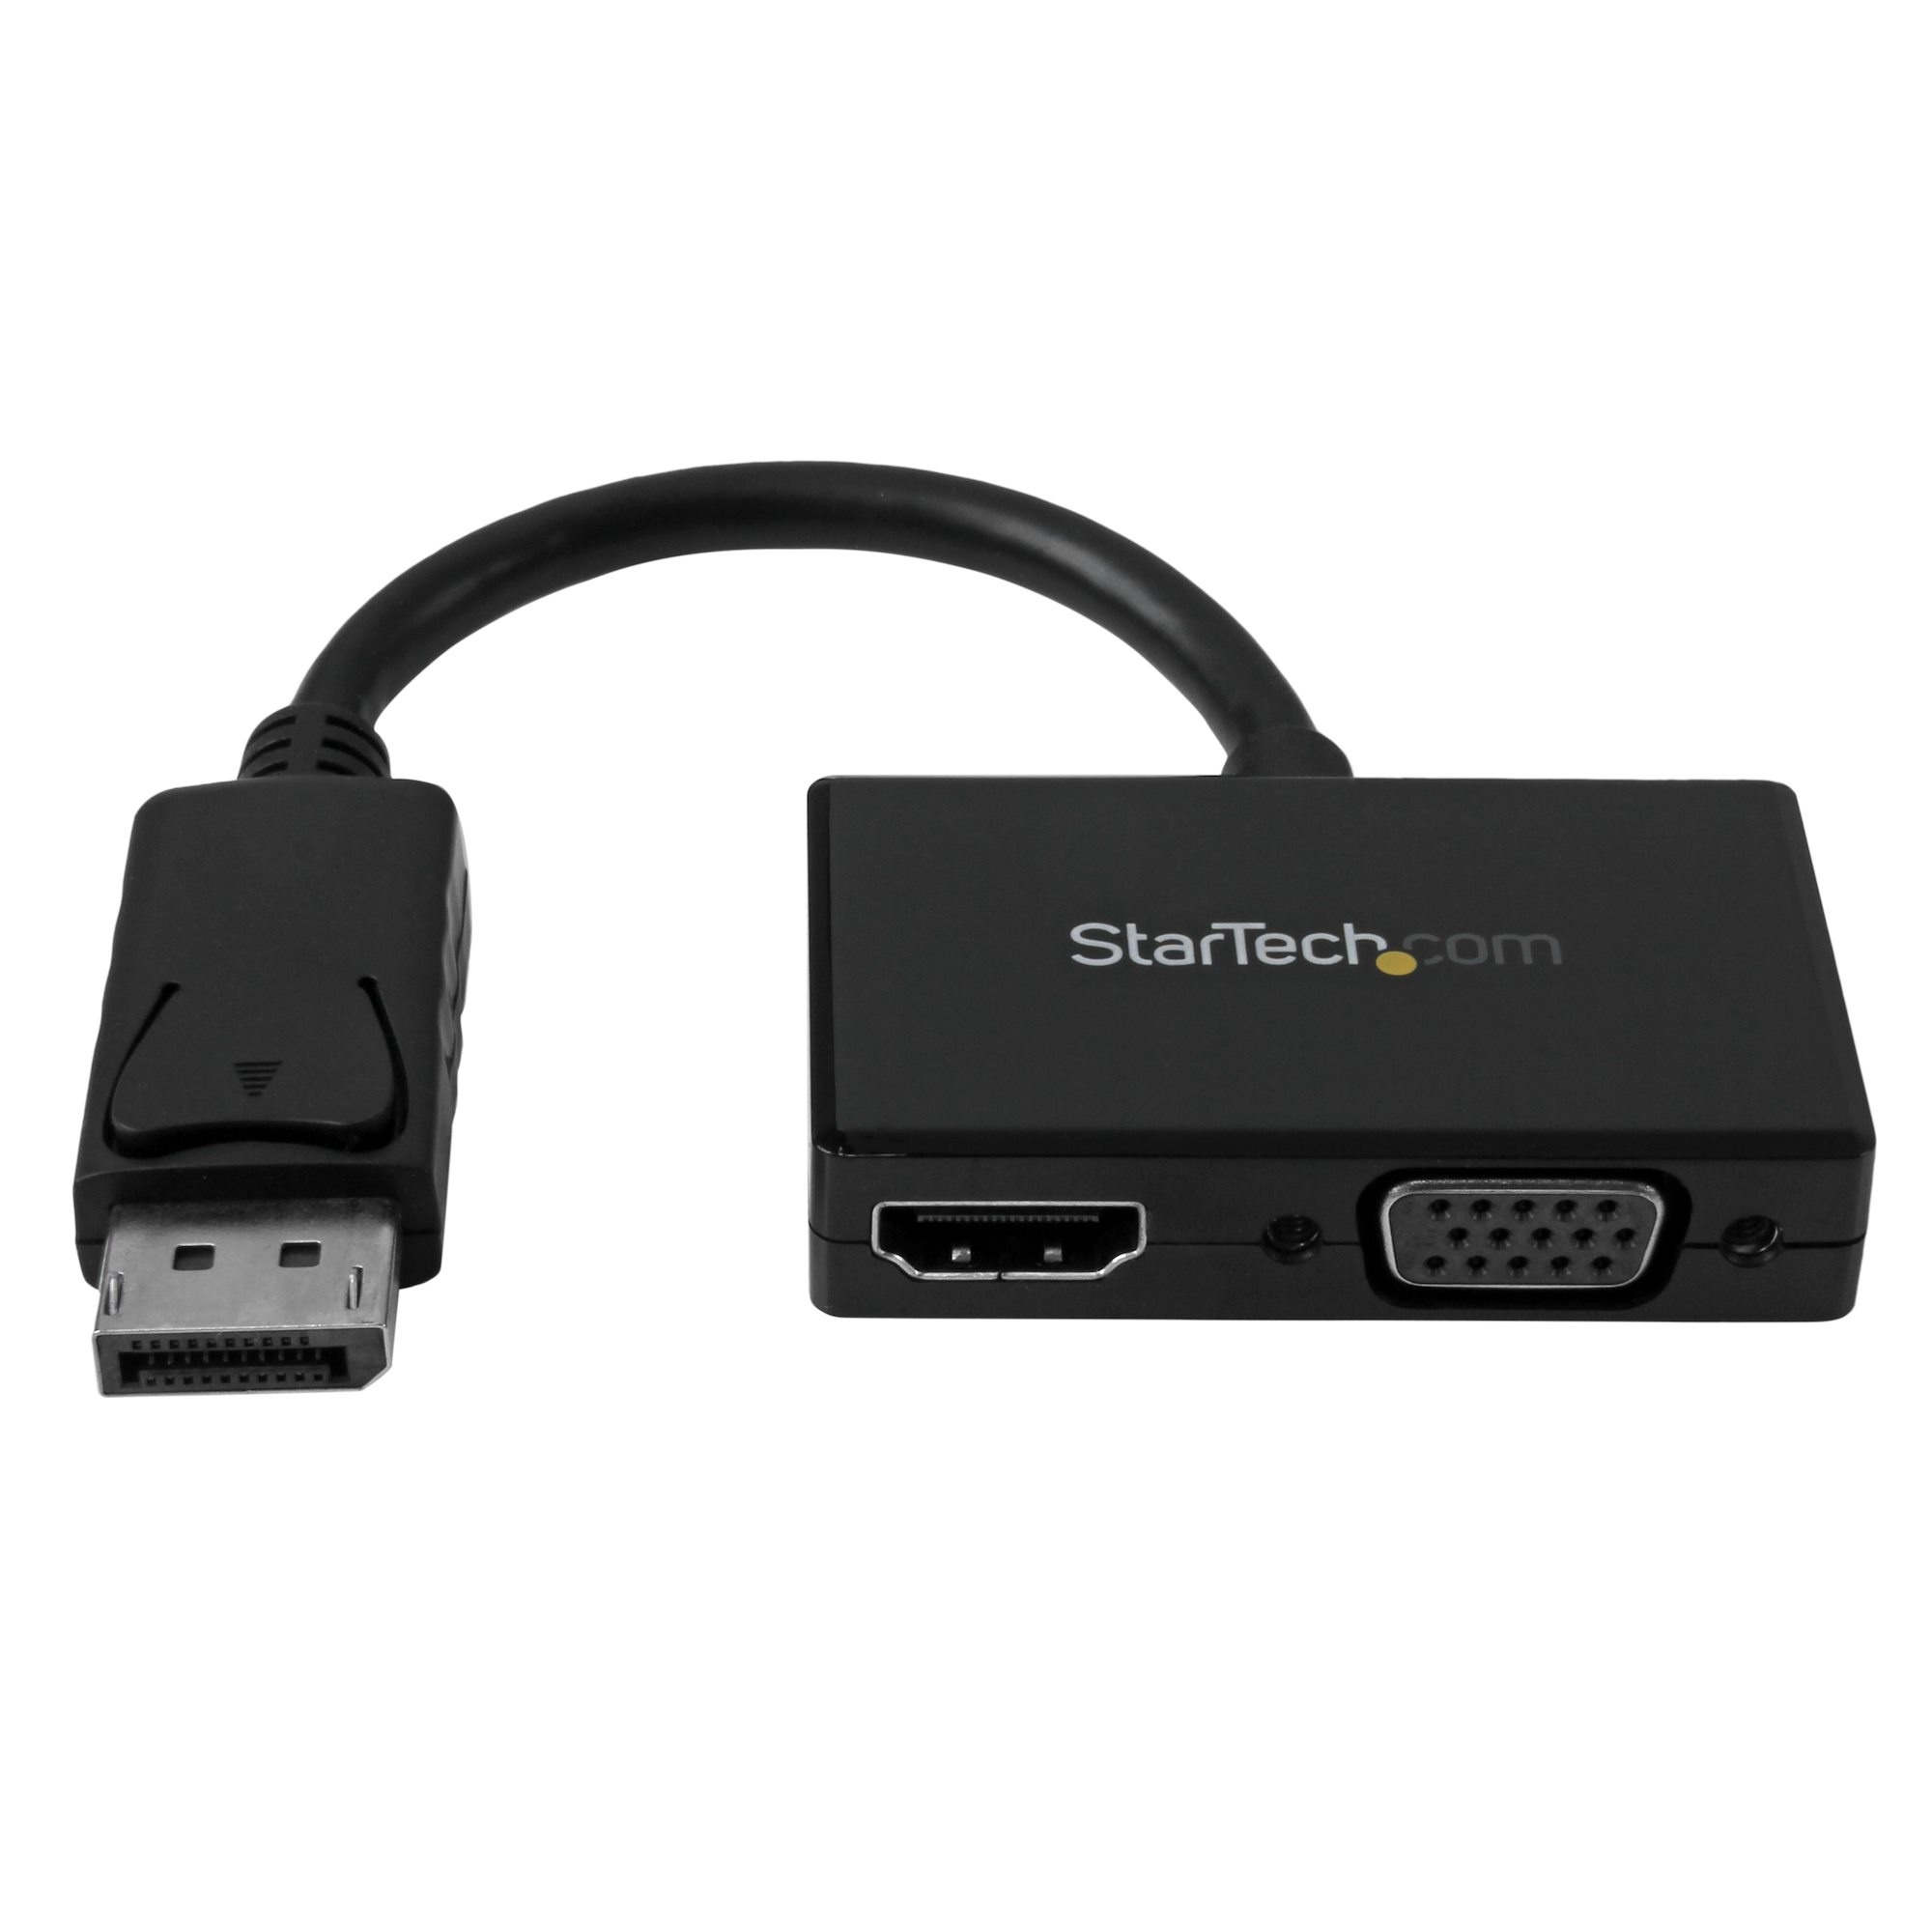 StarTech 2-in-1 DisplayPort to HDMI or VGA Travel A/V Adapter (Black)